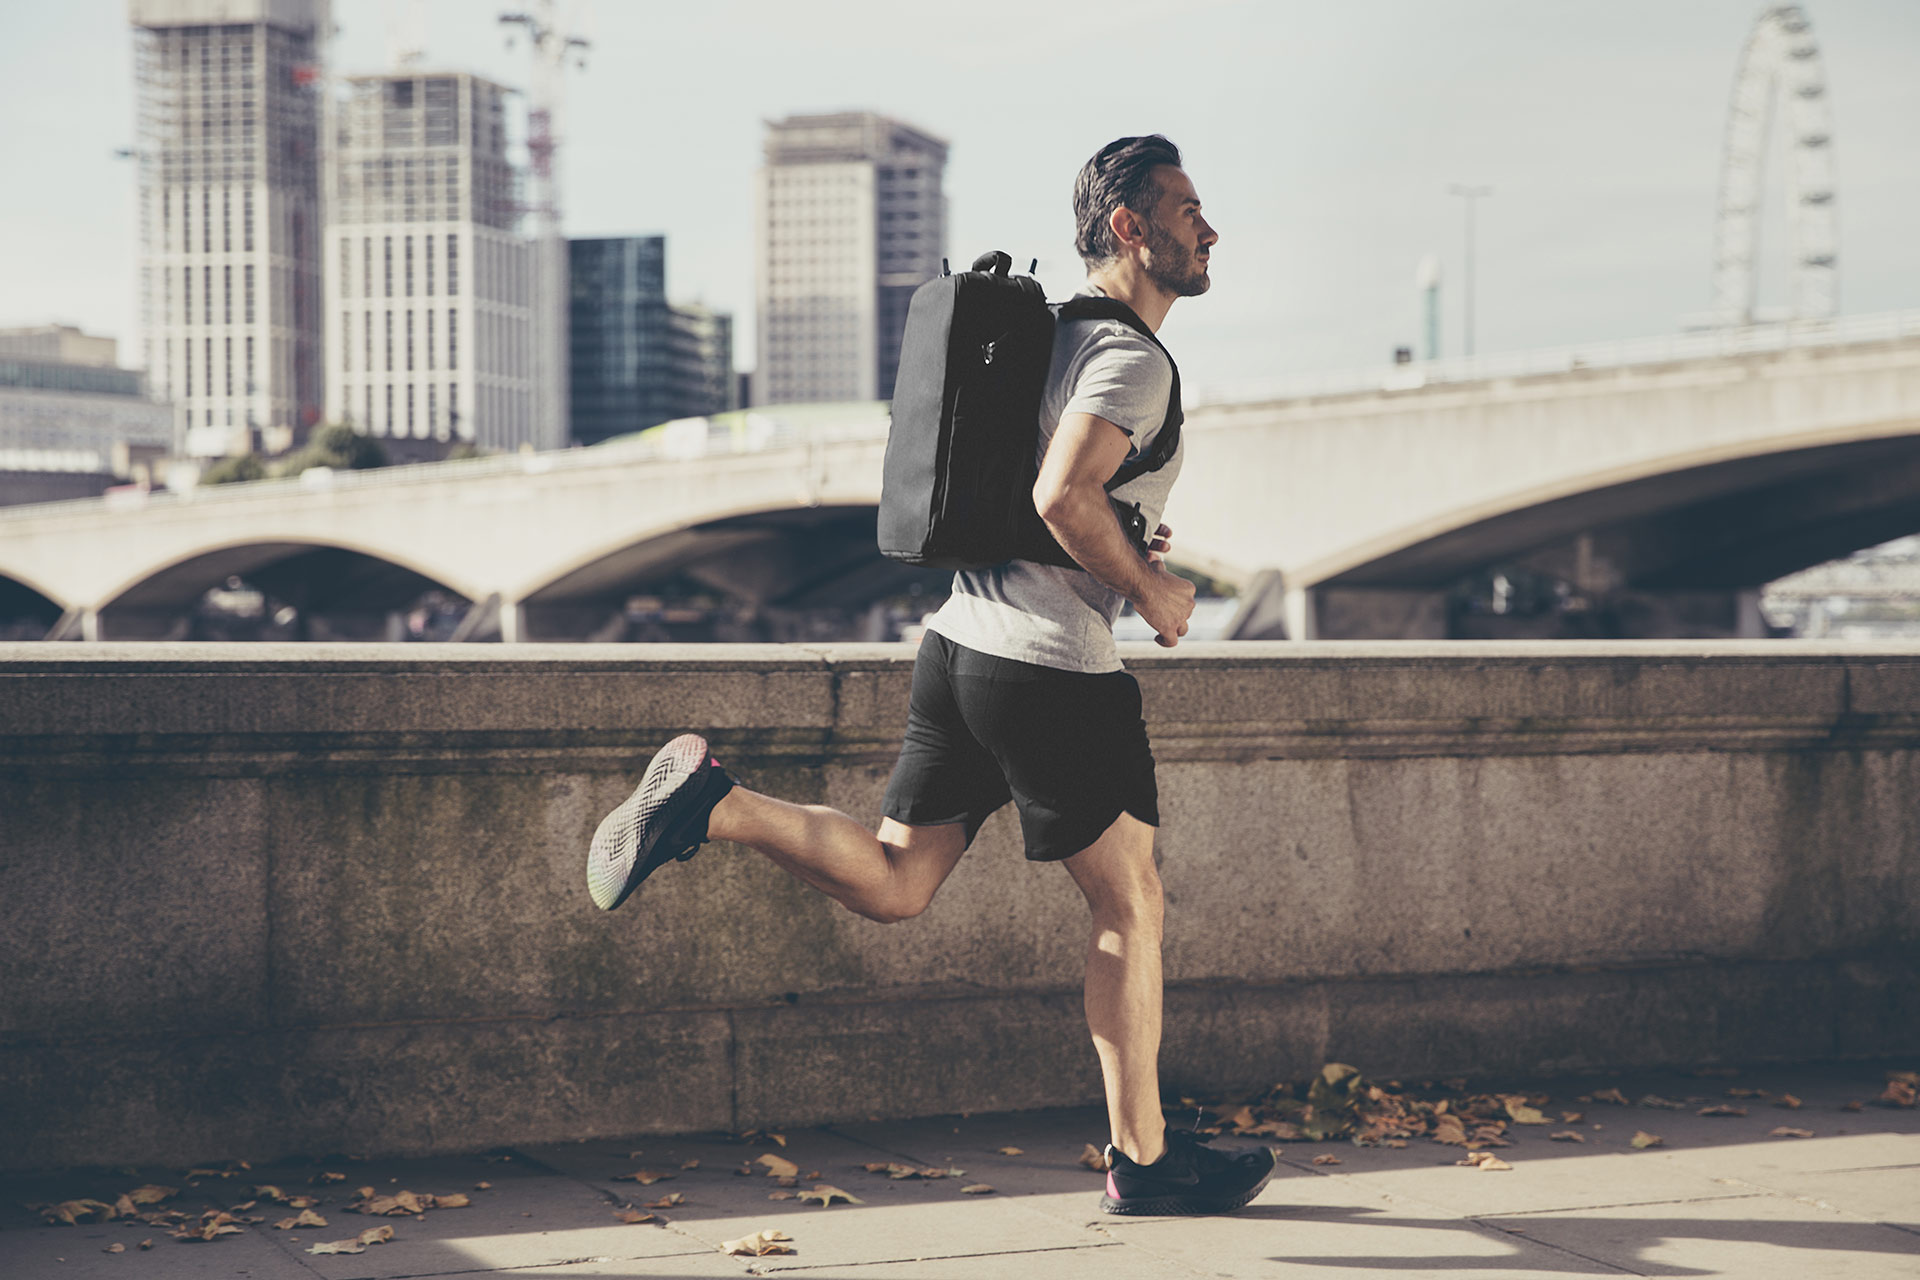 Coach Health & Fitness Guide Endorses the Stolt Alpha Backpack